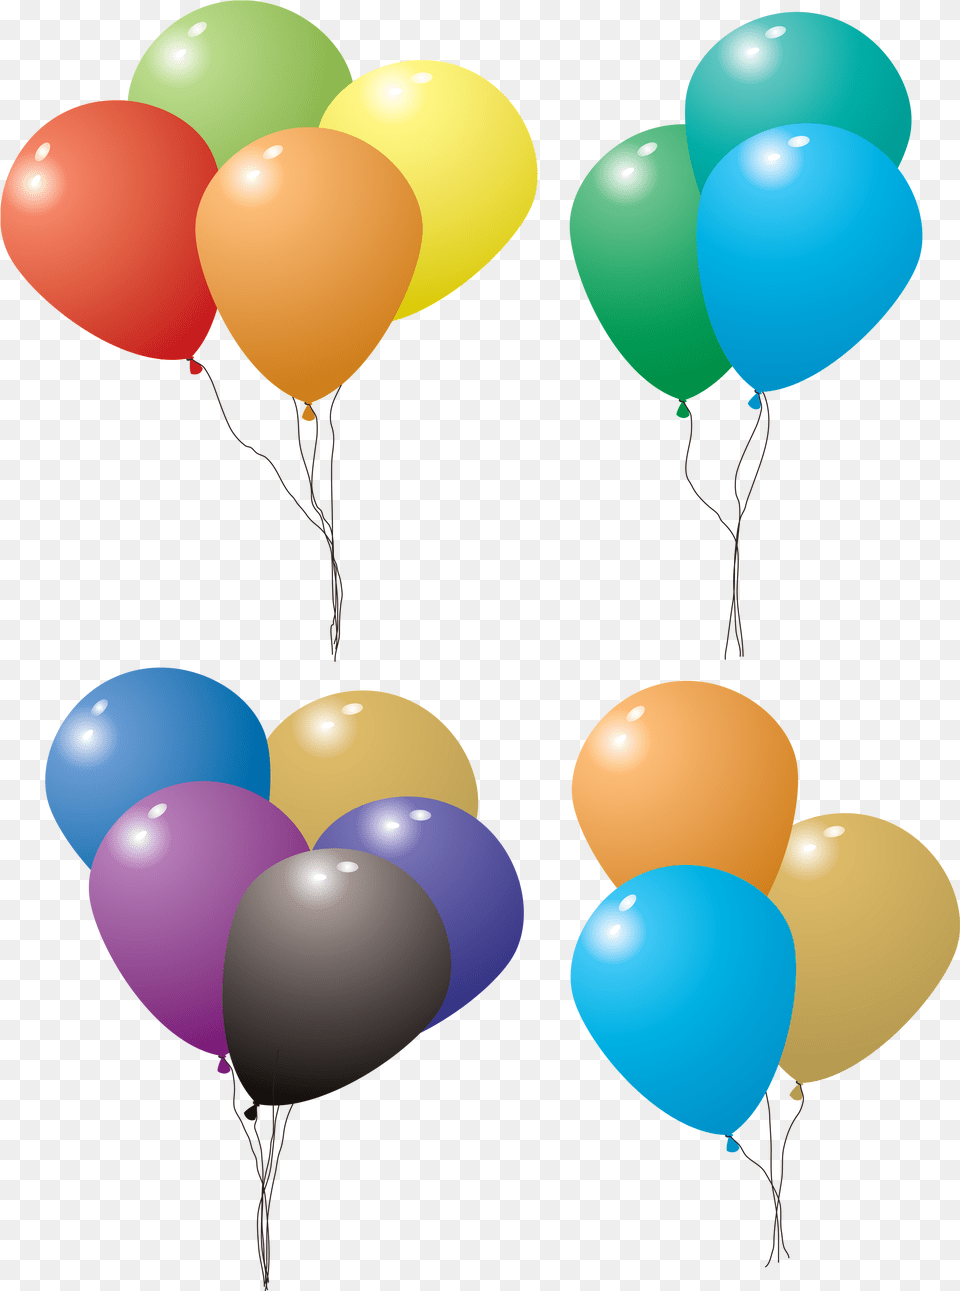 Happy Birthday Balloons Images All Balloon Set Png Image